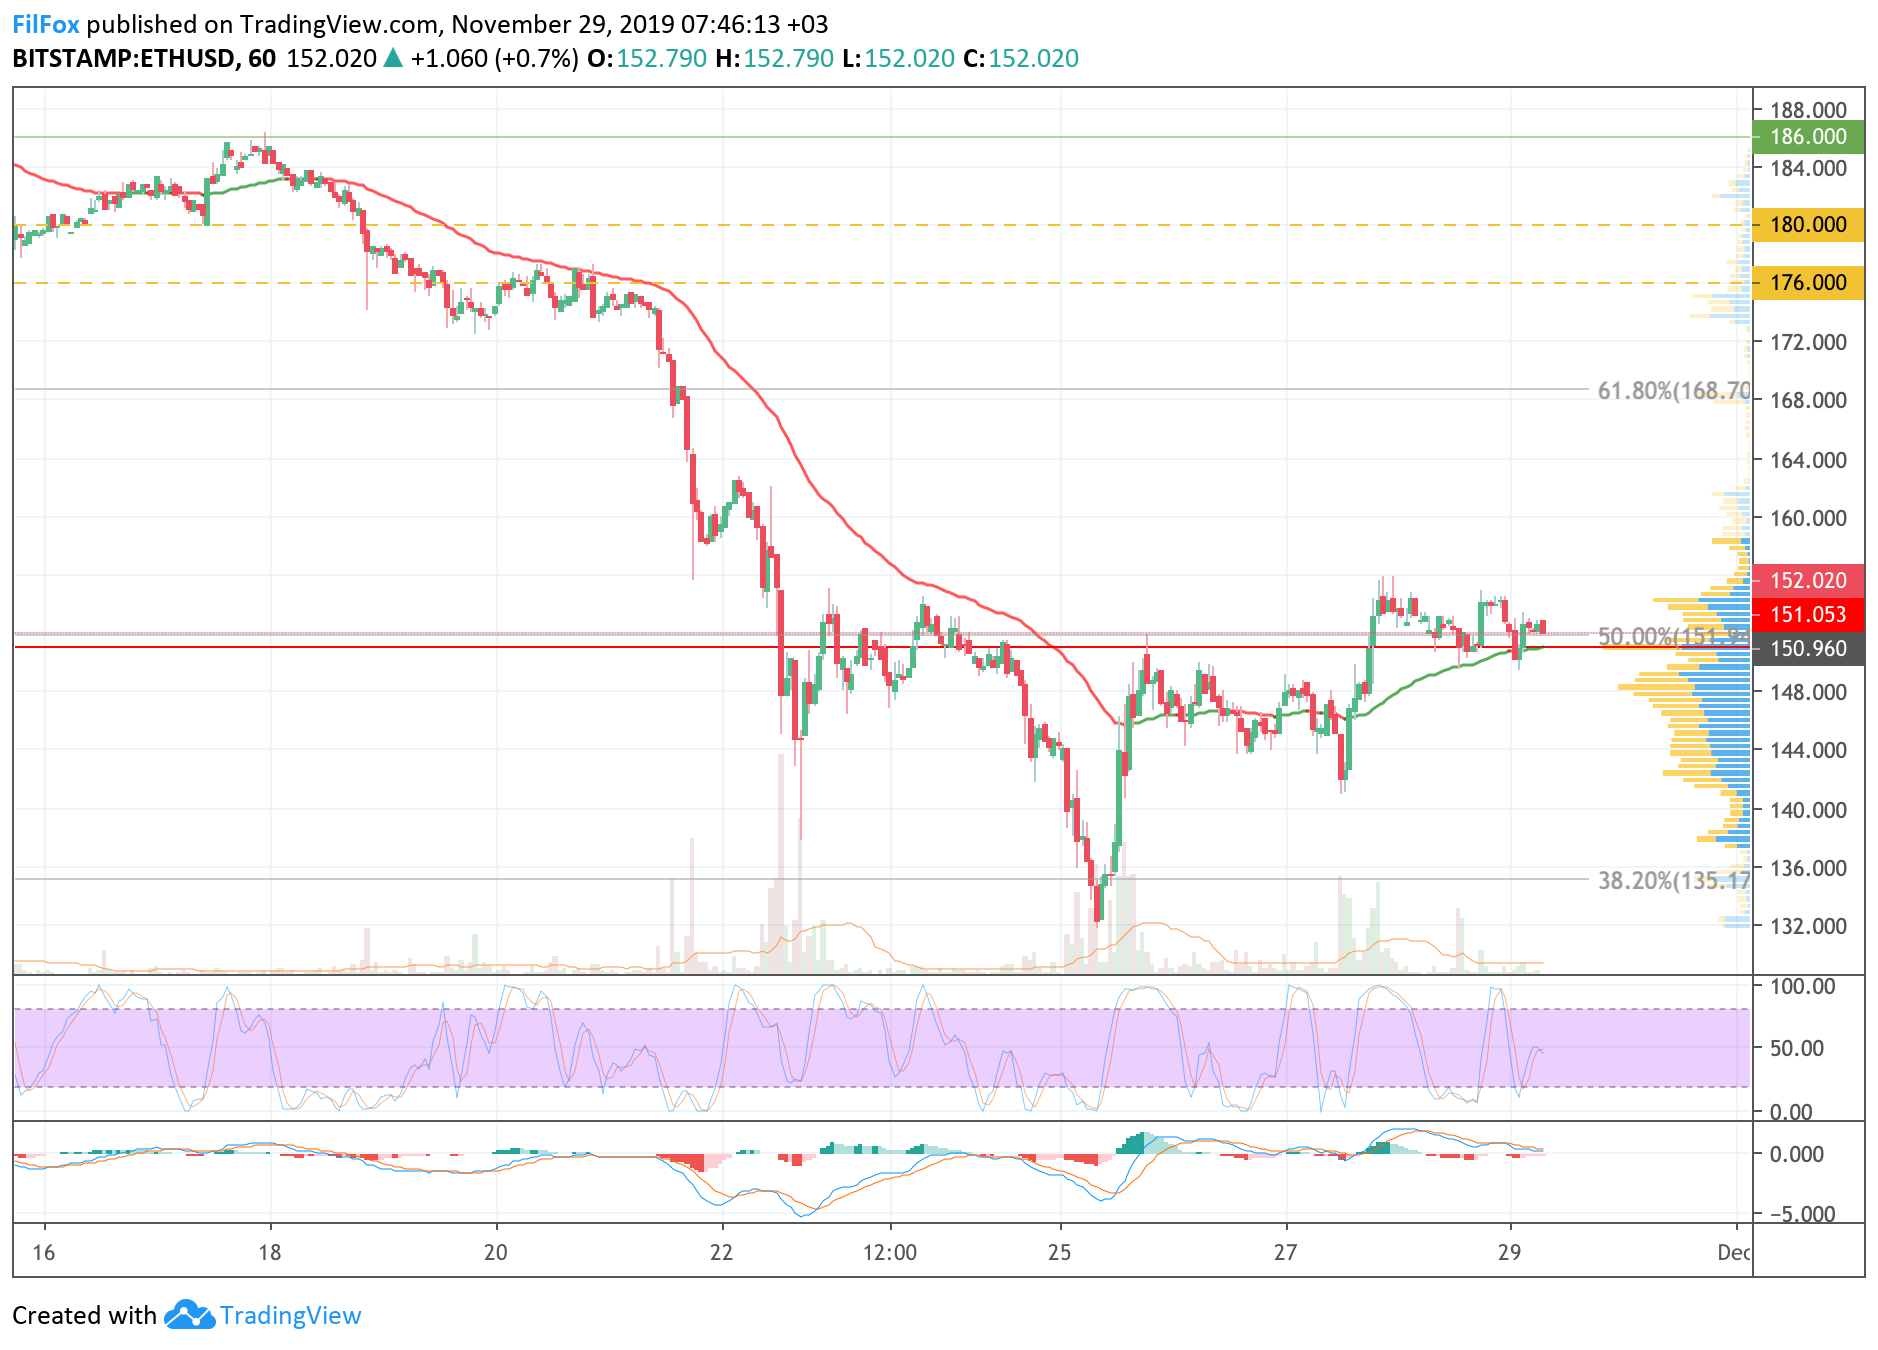 Analysis of cryptocurrency pairs BTC / USD, ETH / USD and XRP / USD on 11.29.2019